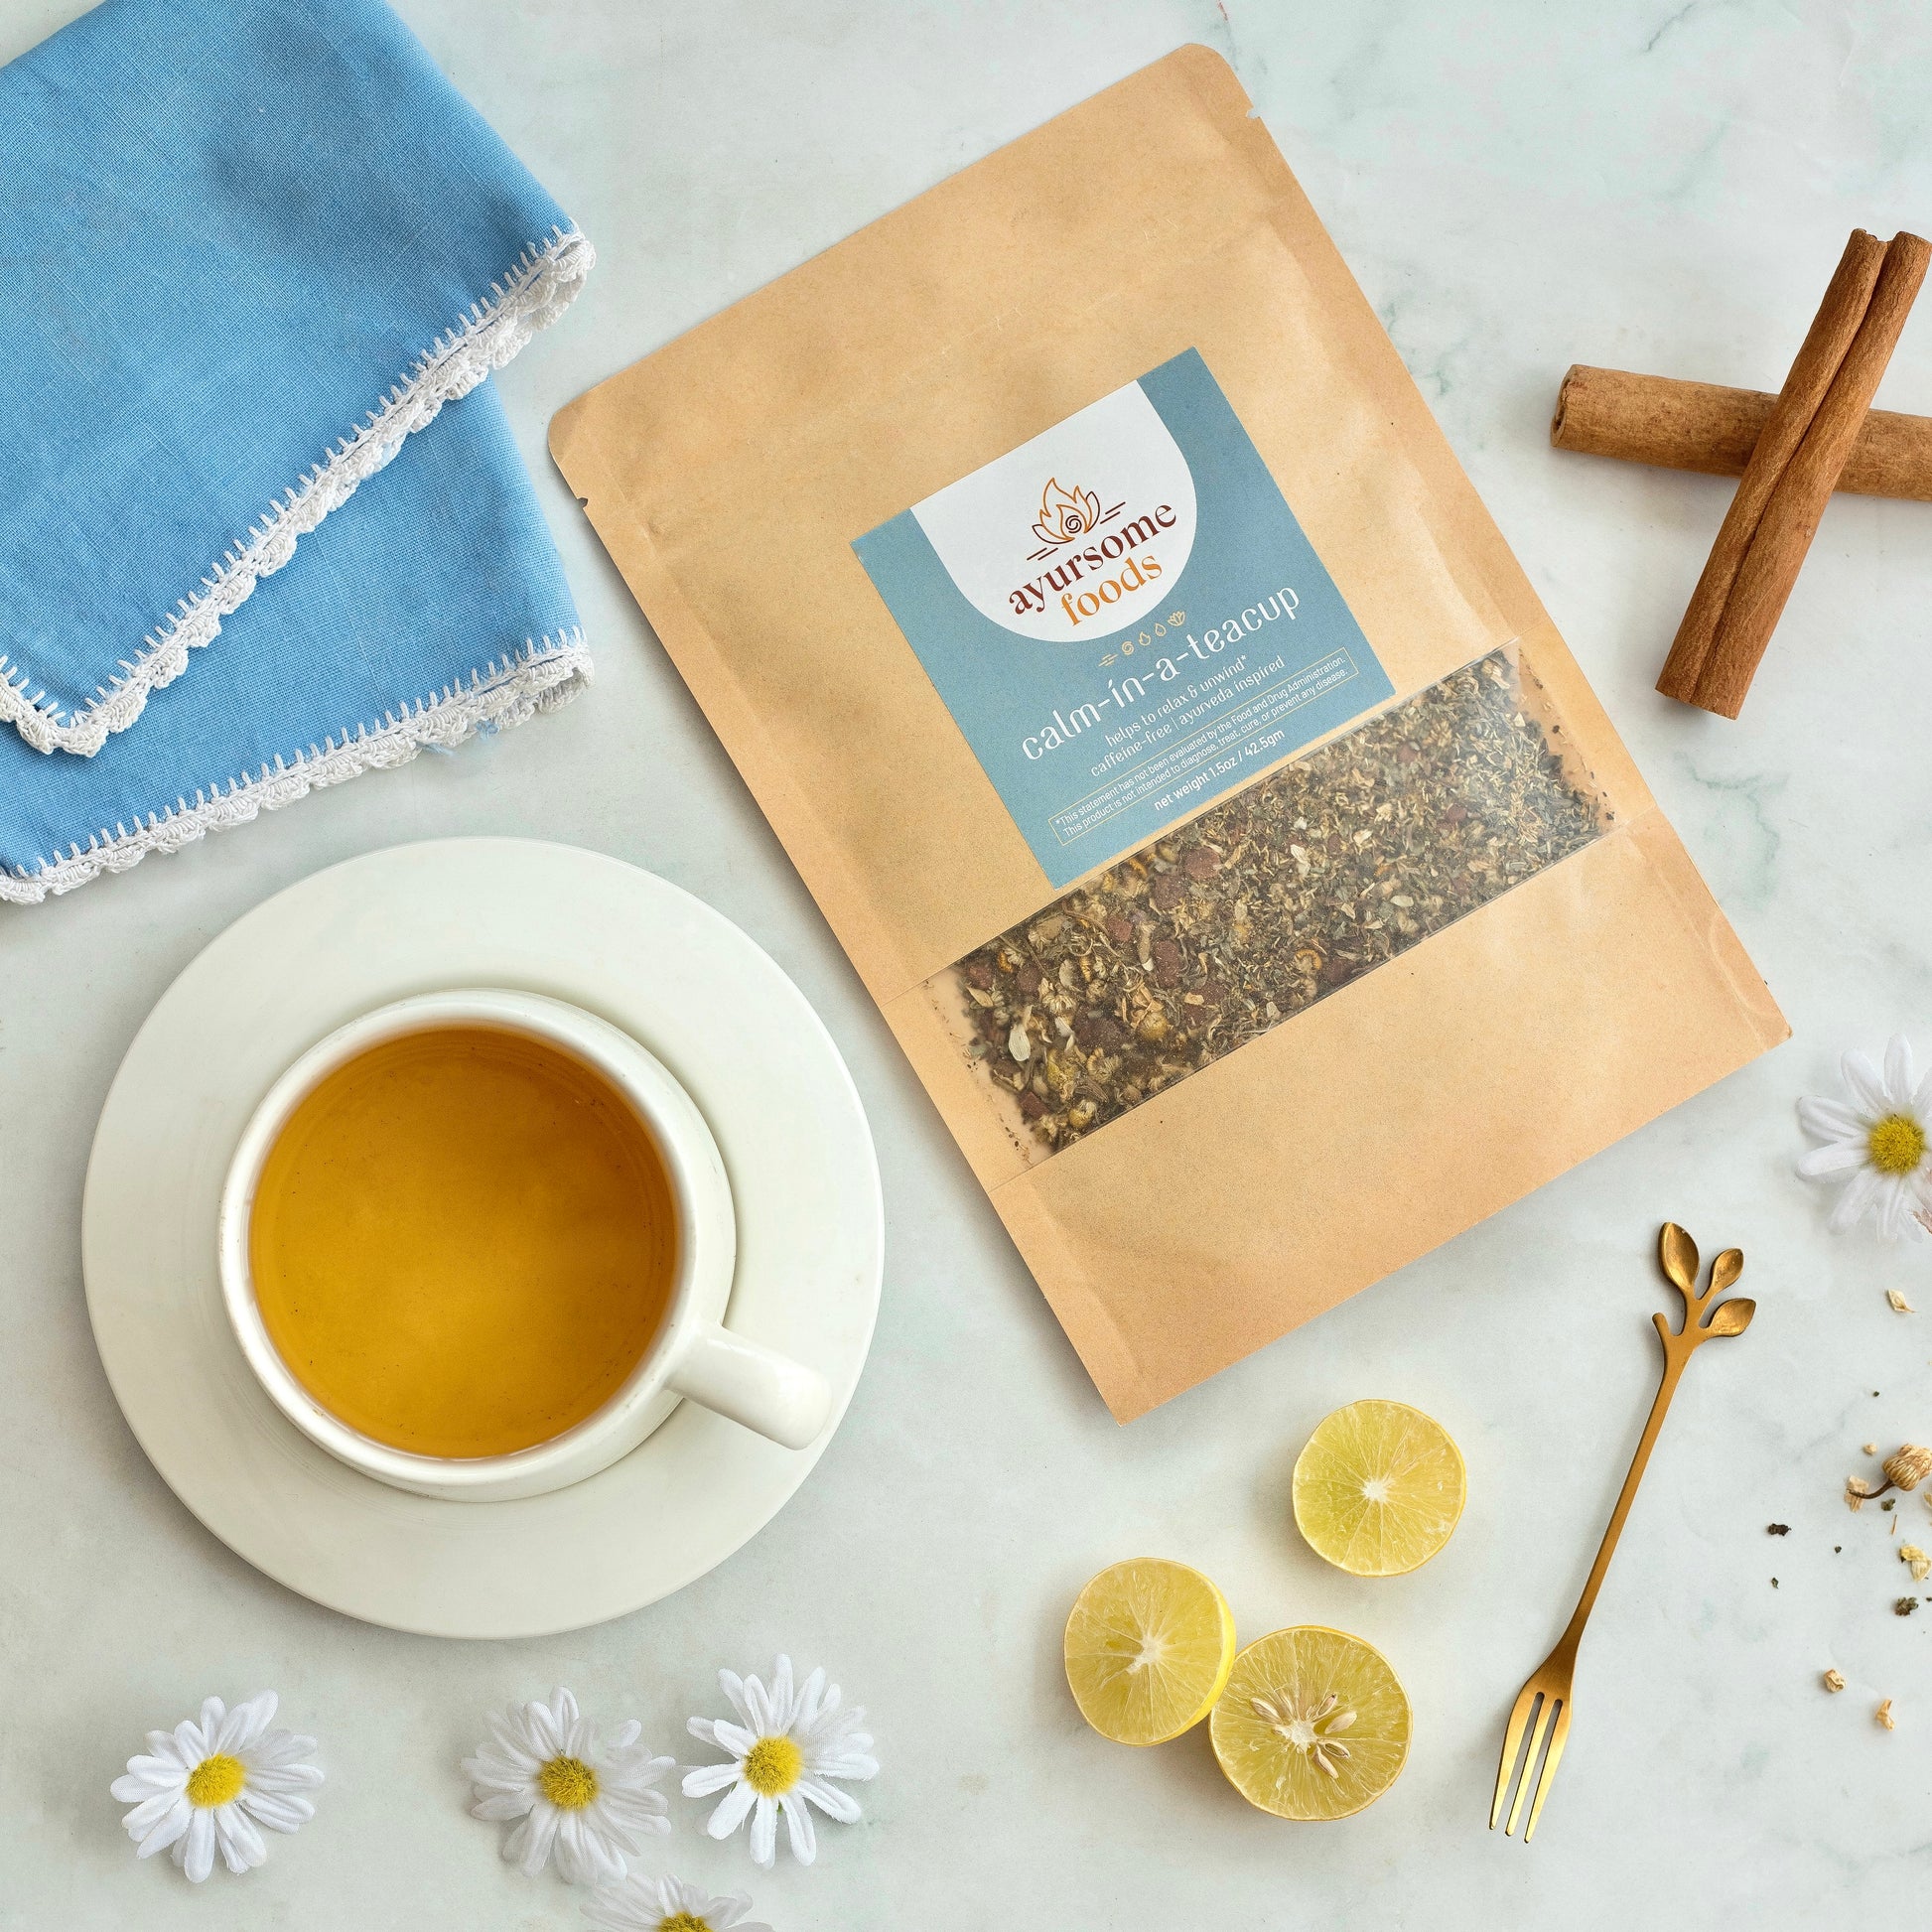  On a white marble background, a pack of the loose leaf chamomile tea for sleep, organic cinnamon sticks, lemon slices, blue napkin, golden fork, a teacup full of herbal night time tea, organic chamomile flowers. This herbal loose leaf lemon balm and chamomile tea is made by Ayursome Foods in NJ, USA.